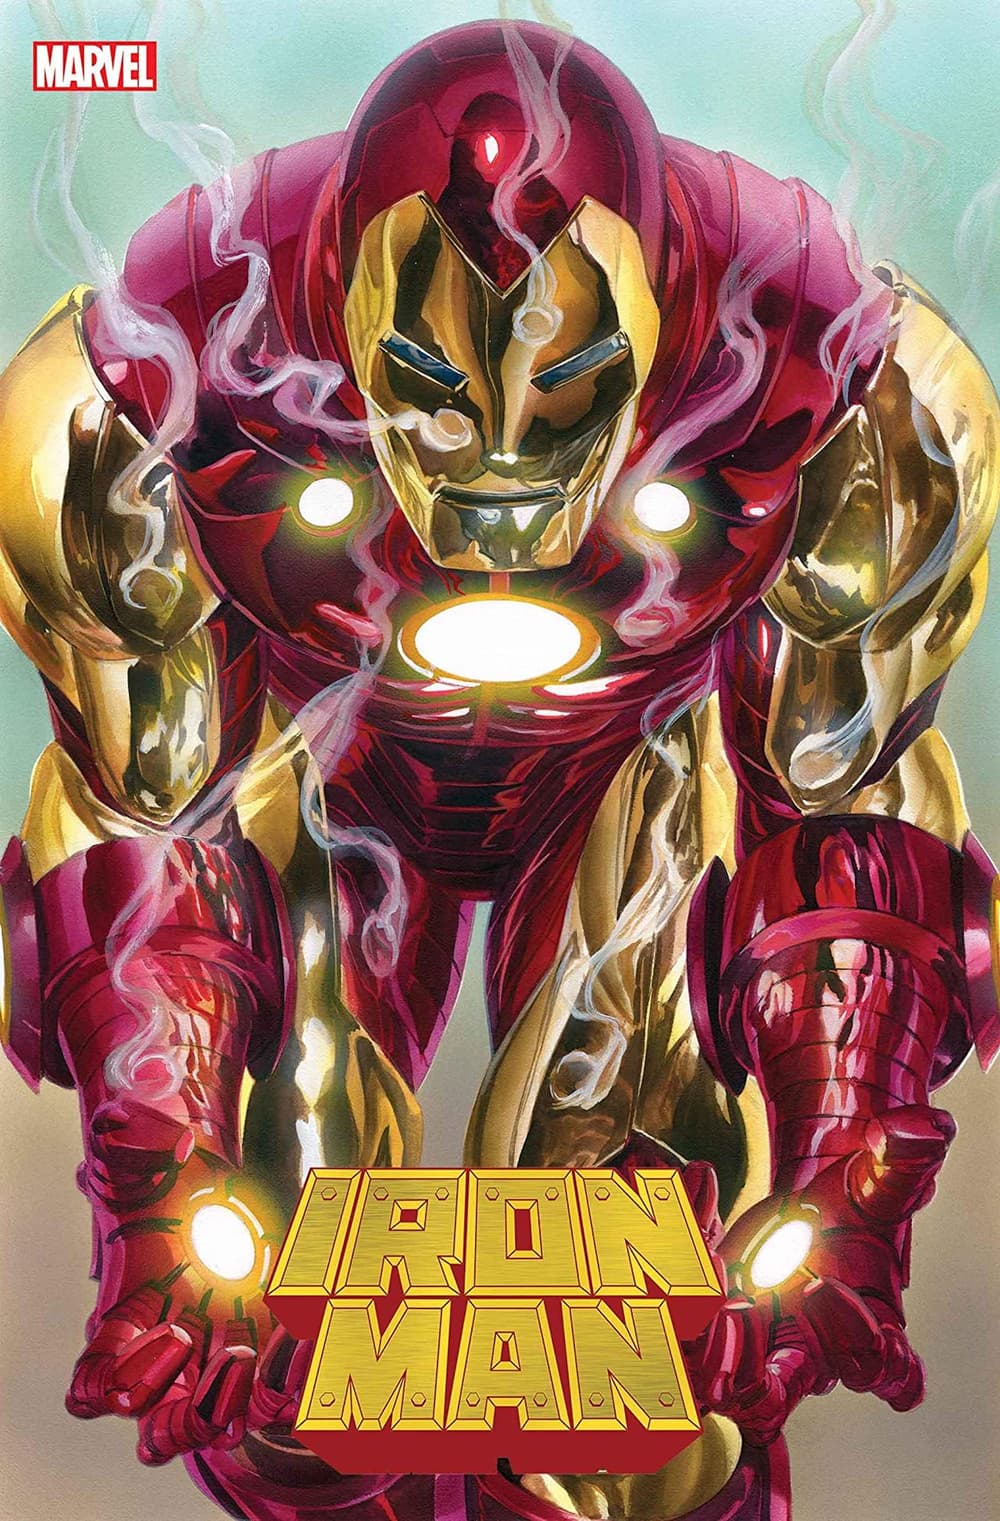 IRON MAN #2 cover by Alex Ross